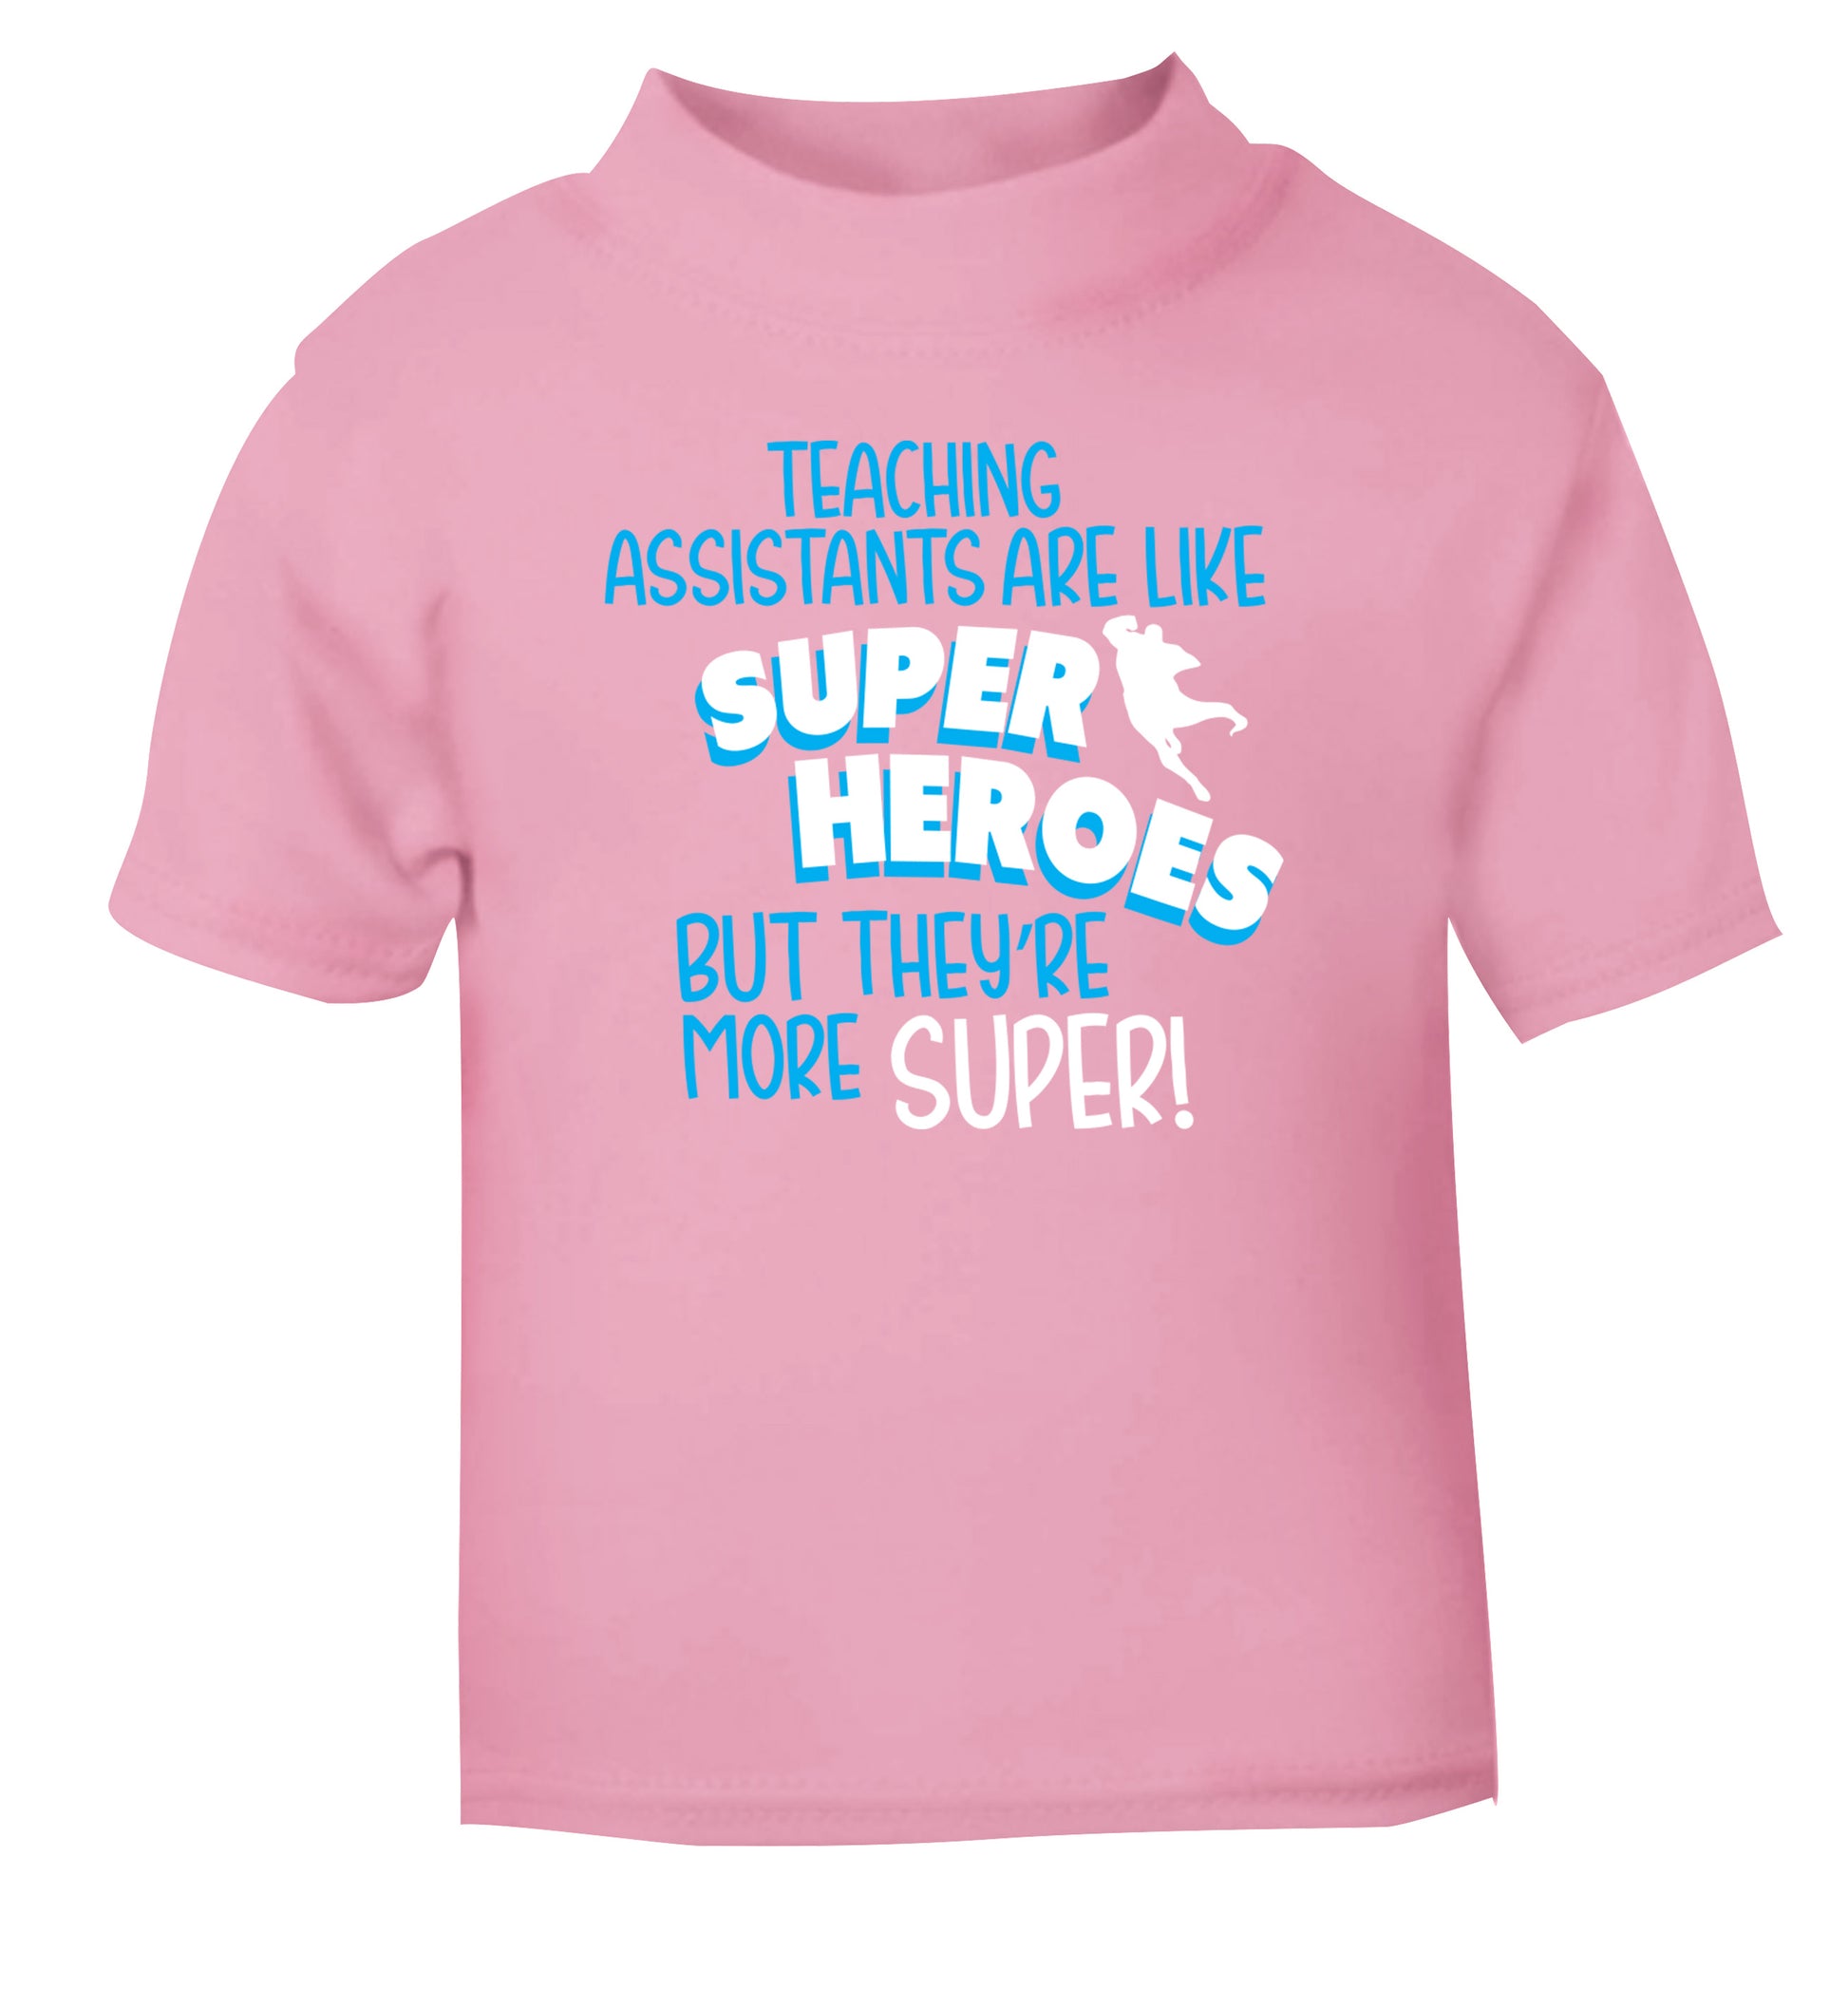 Teaching assistants are like superheros but they're more super light pink Baby Toddler Tshirt 2 Years